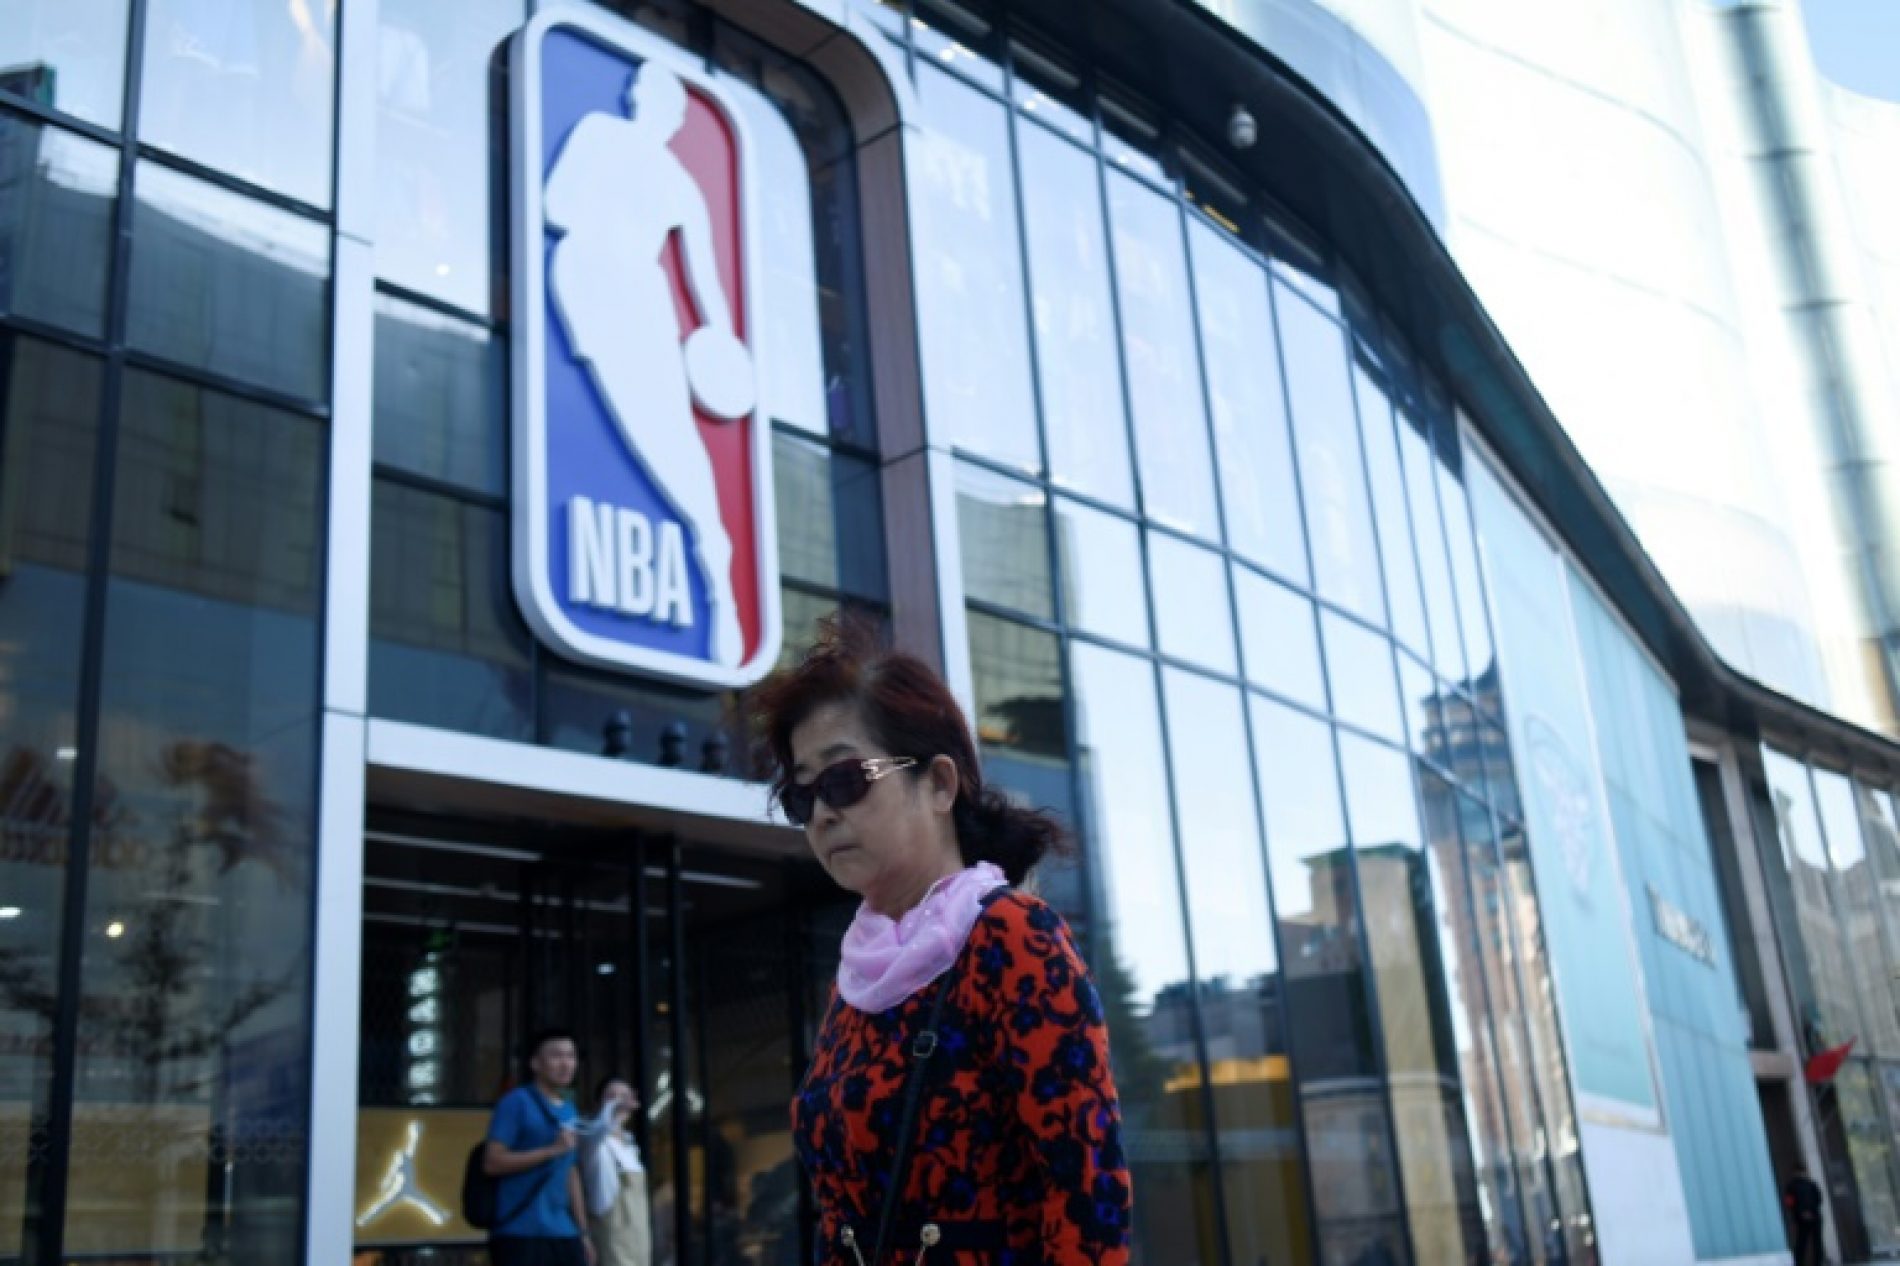 US Lawmakers Urge NBA to Suspend China Activities Over Boycott